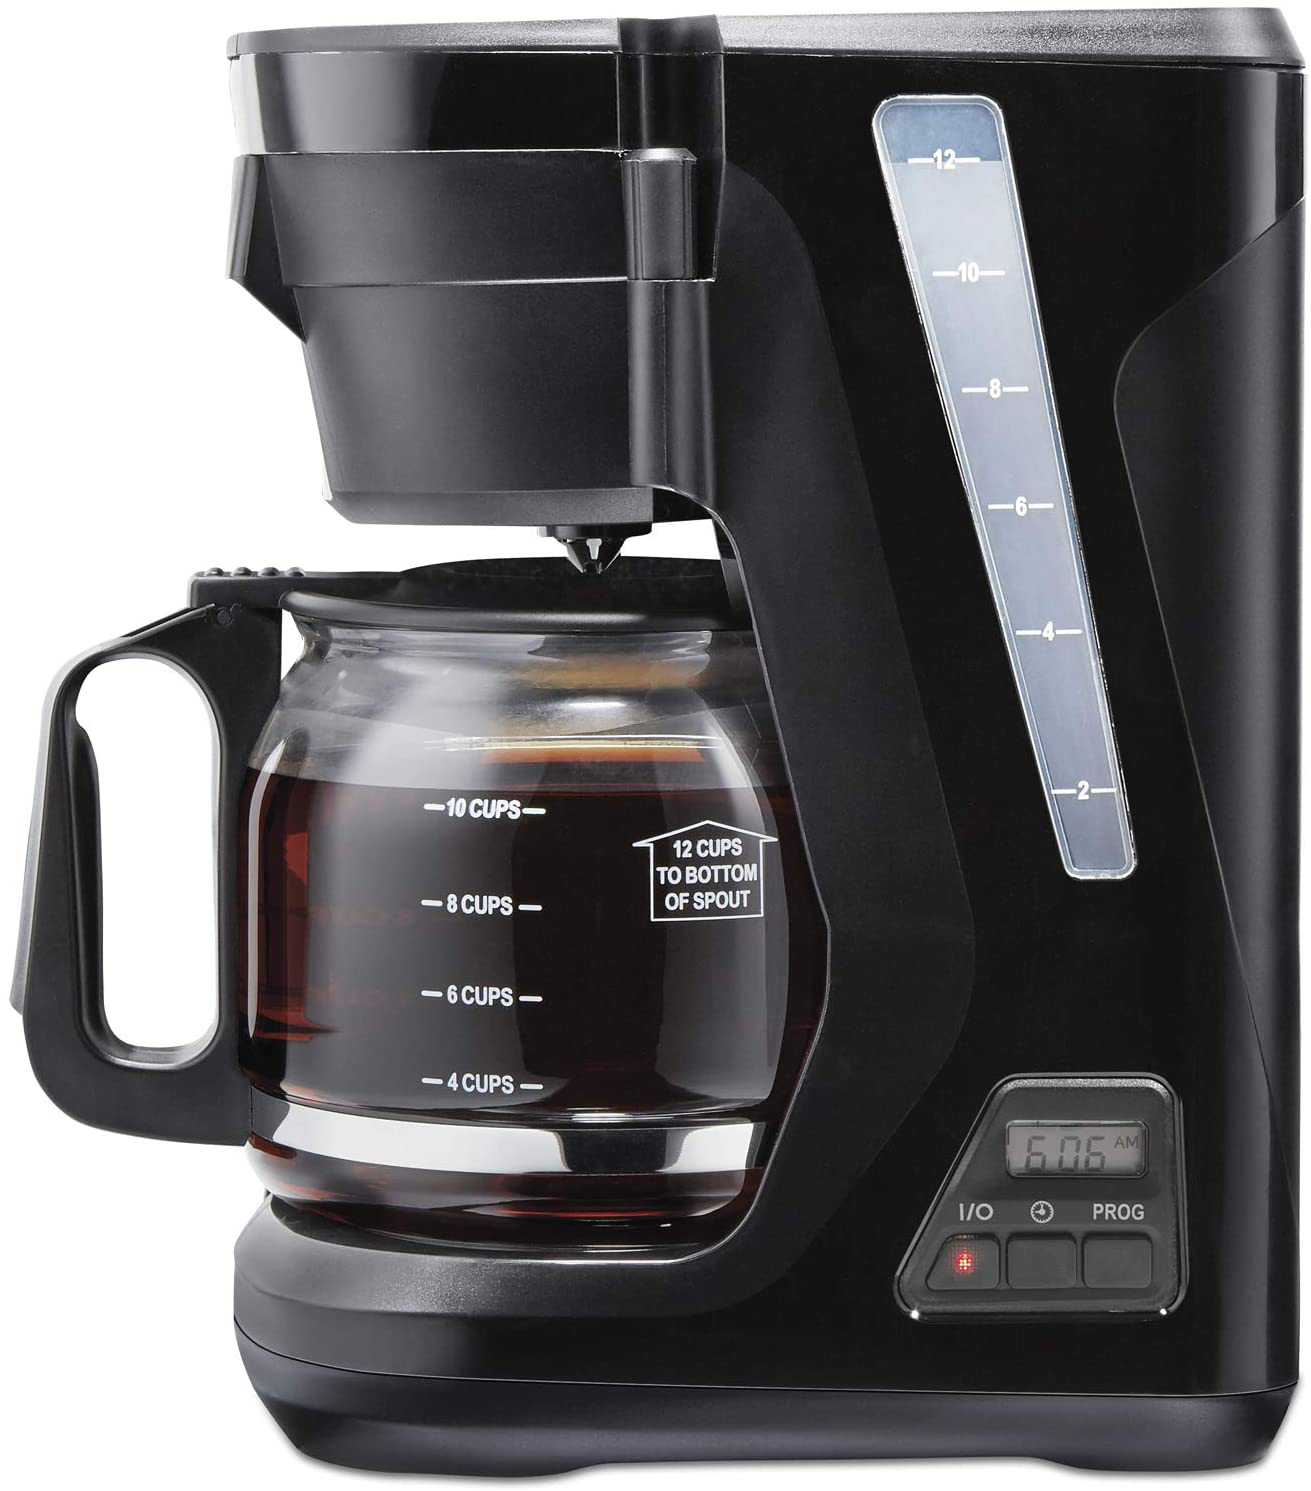 Proctor Silex FrontFill Compact 12 Cup Programmable Coffee Maker, Glass Carafe, Black (43685PS)